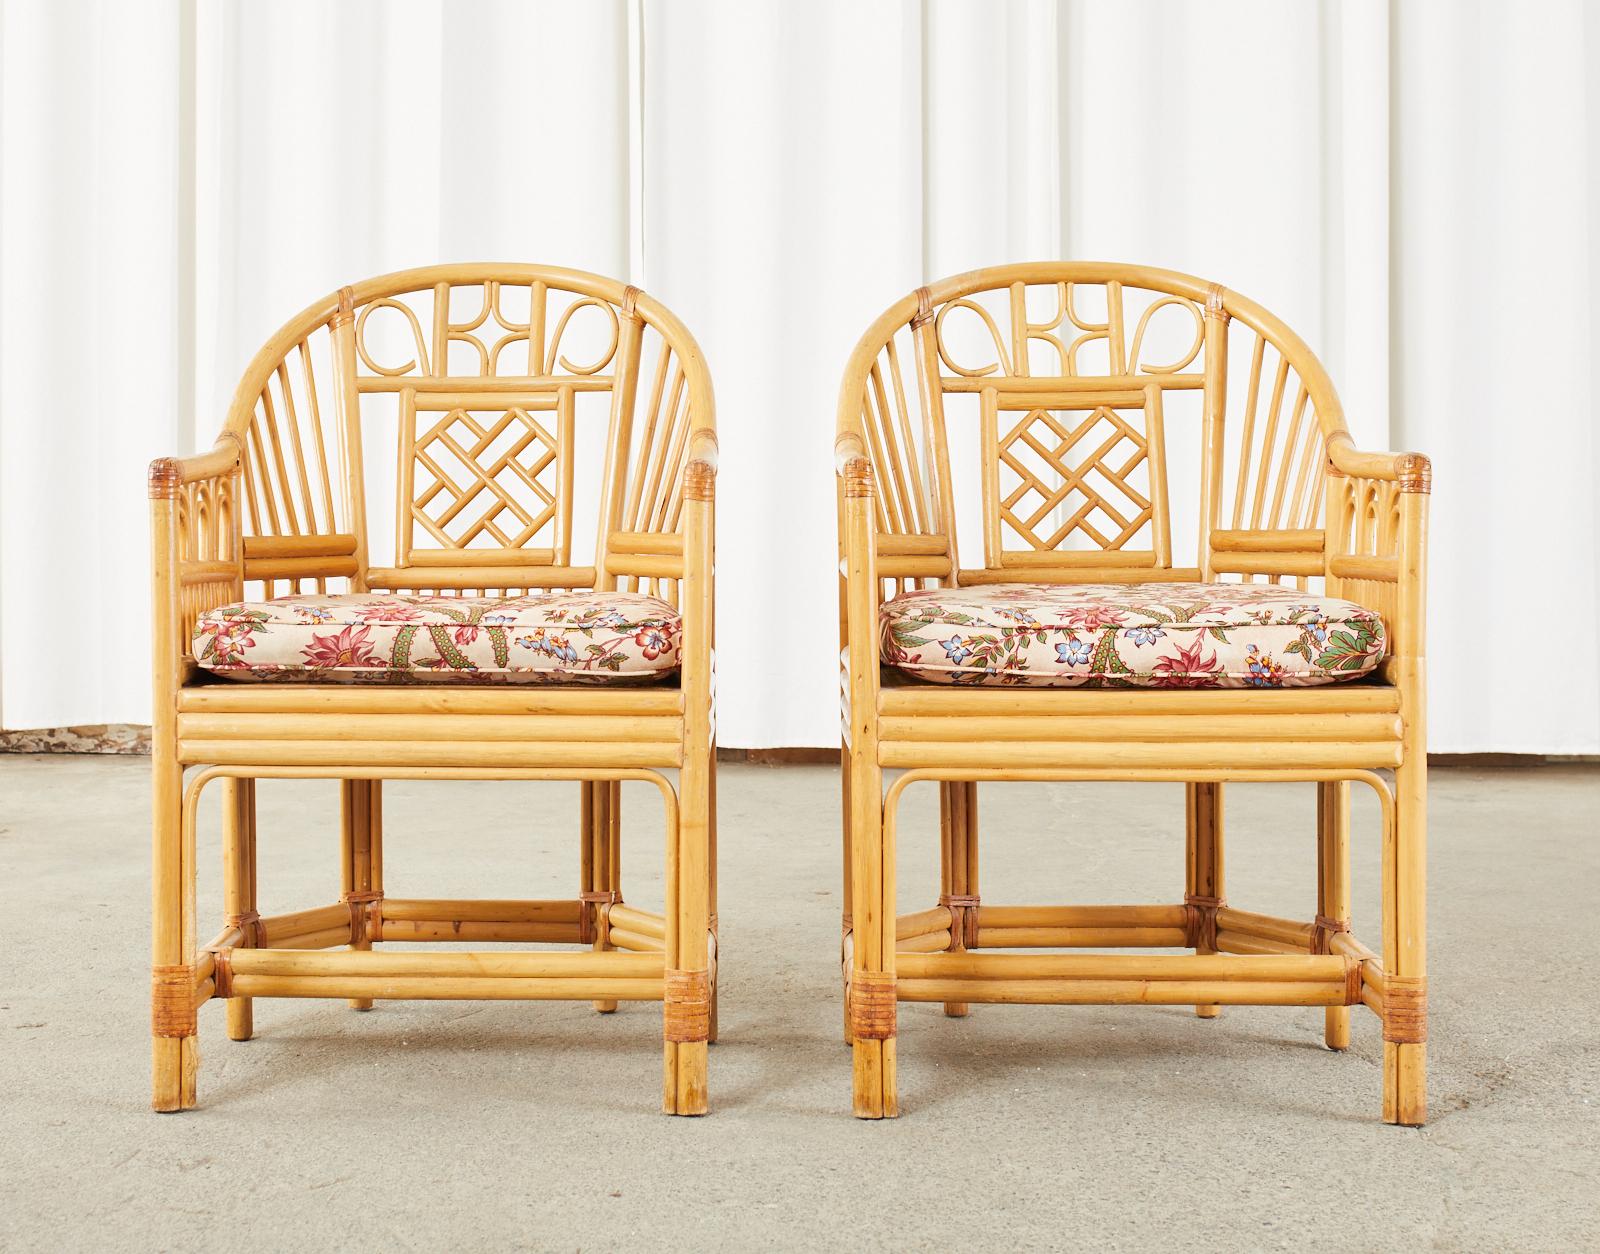 Distinctive pair of bamboo rattan barrel back armchairs made in the grand Brighton pavilion style. The mid-century chairs feature a bamboo rattan frame with decorative Chinese Chippendale style open fretwork designs. The chairs have a caned seat and